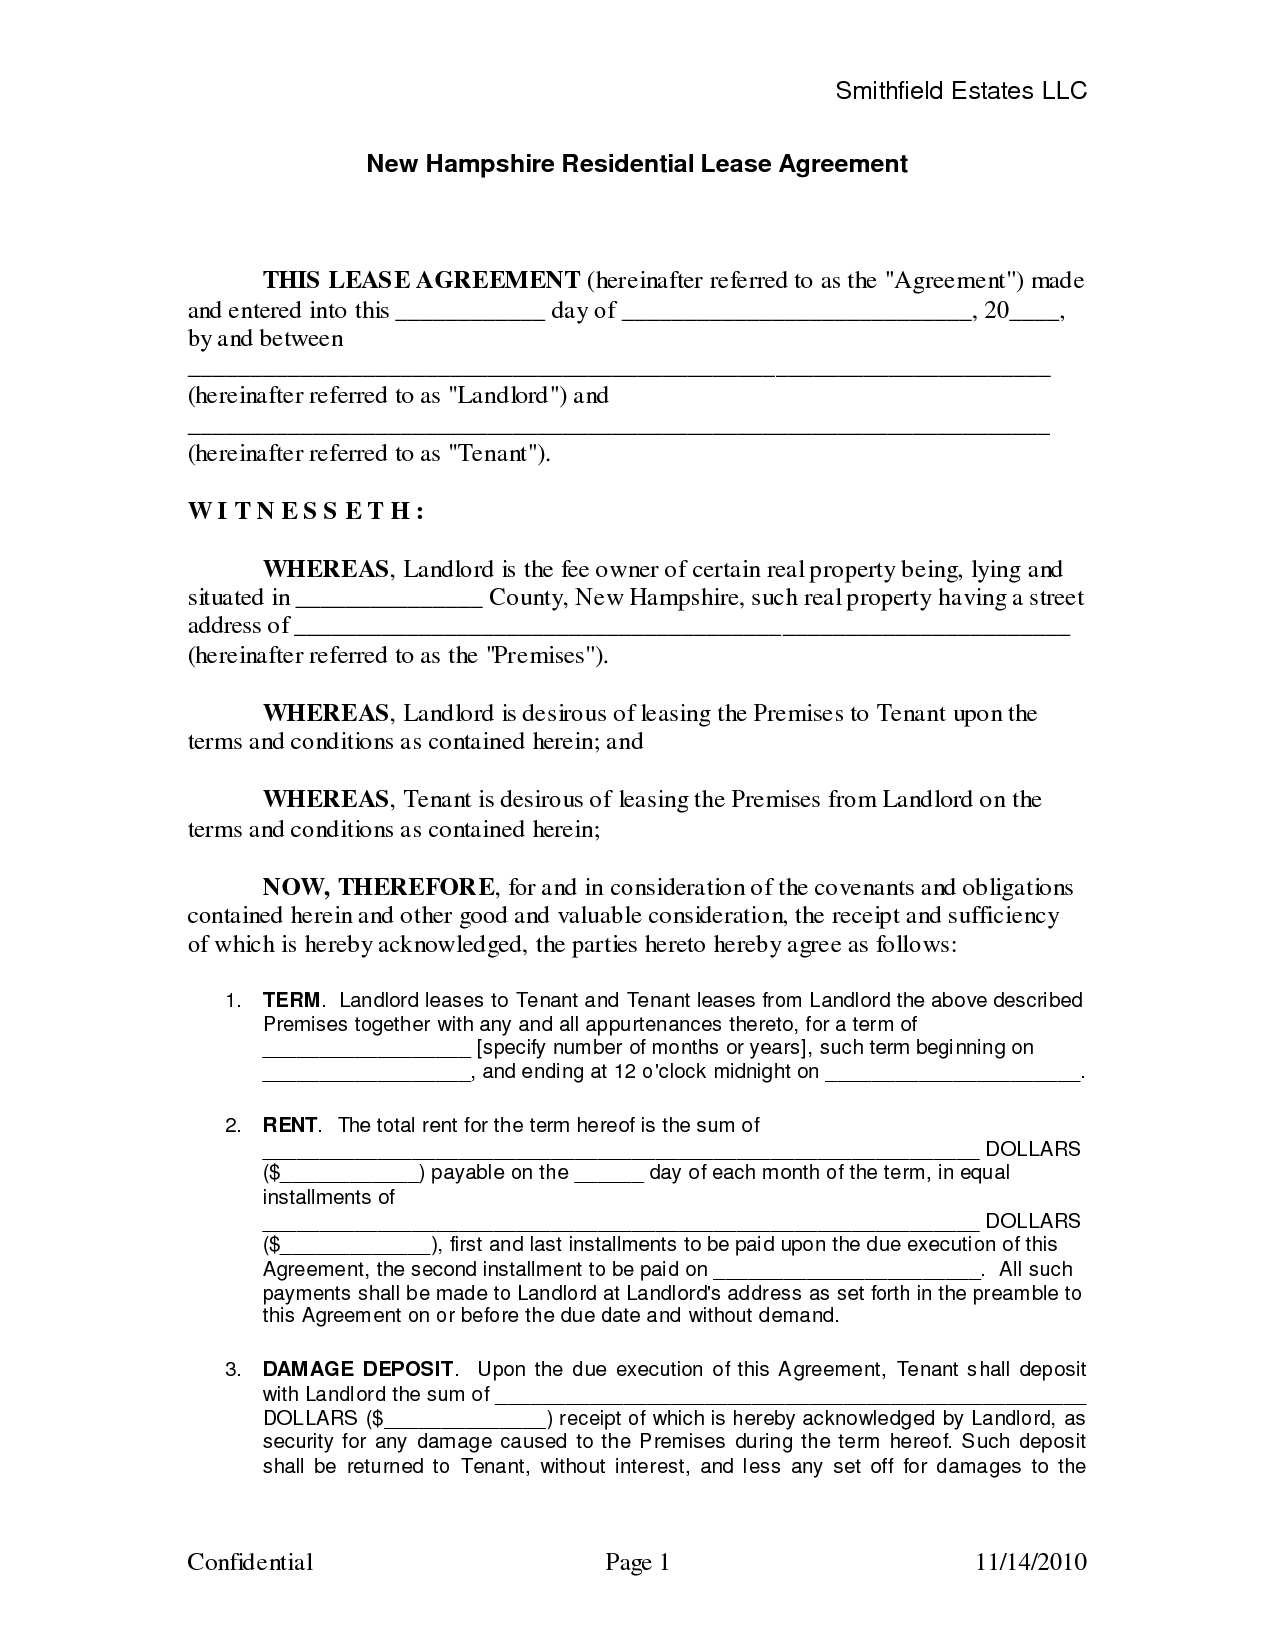 Lease Agreement Sample Form Free Commercial Lease Agreement Template Radiodignidad